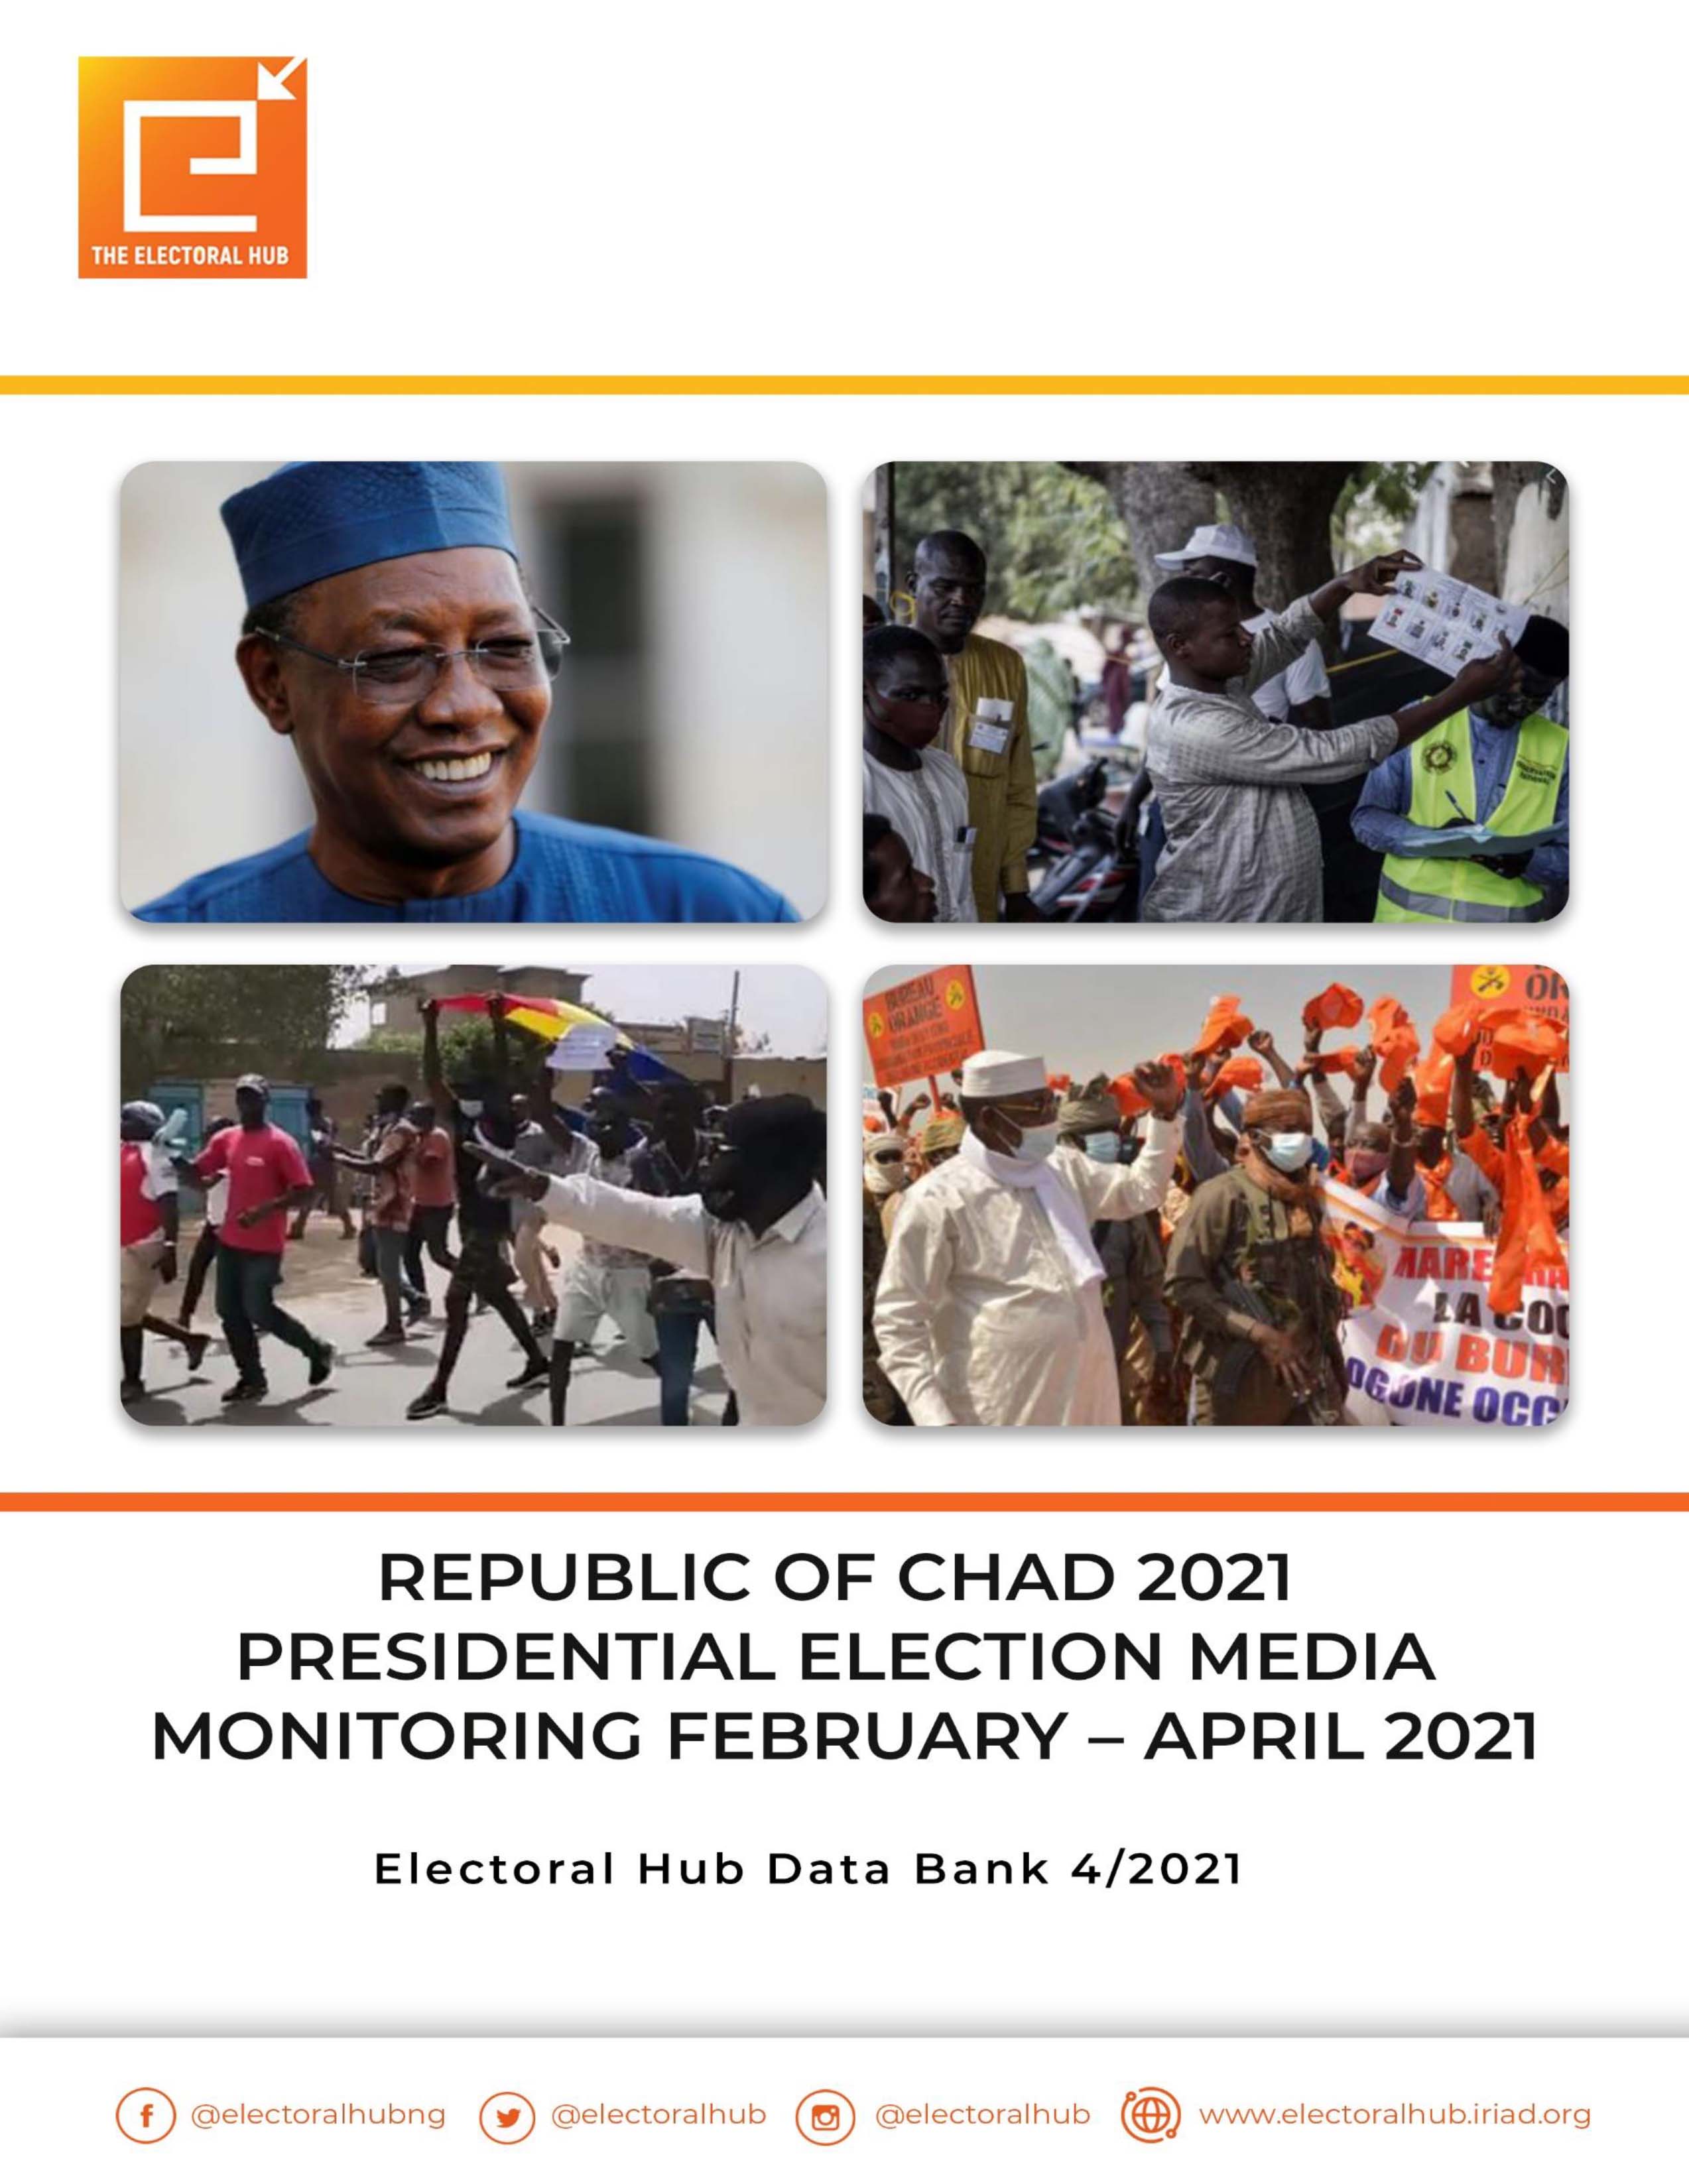 Republic of Chad 2021 Presidential Election Media Monitoring February – April 2021